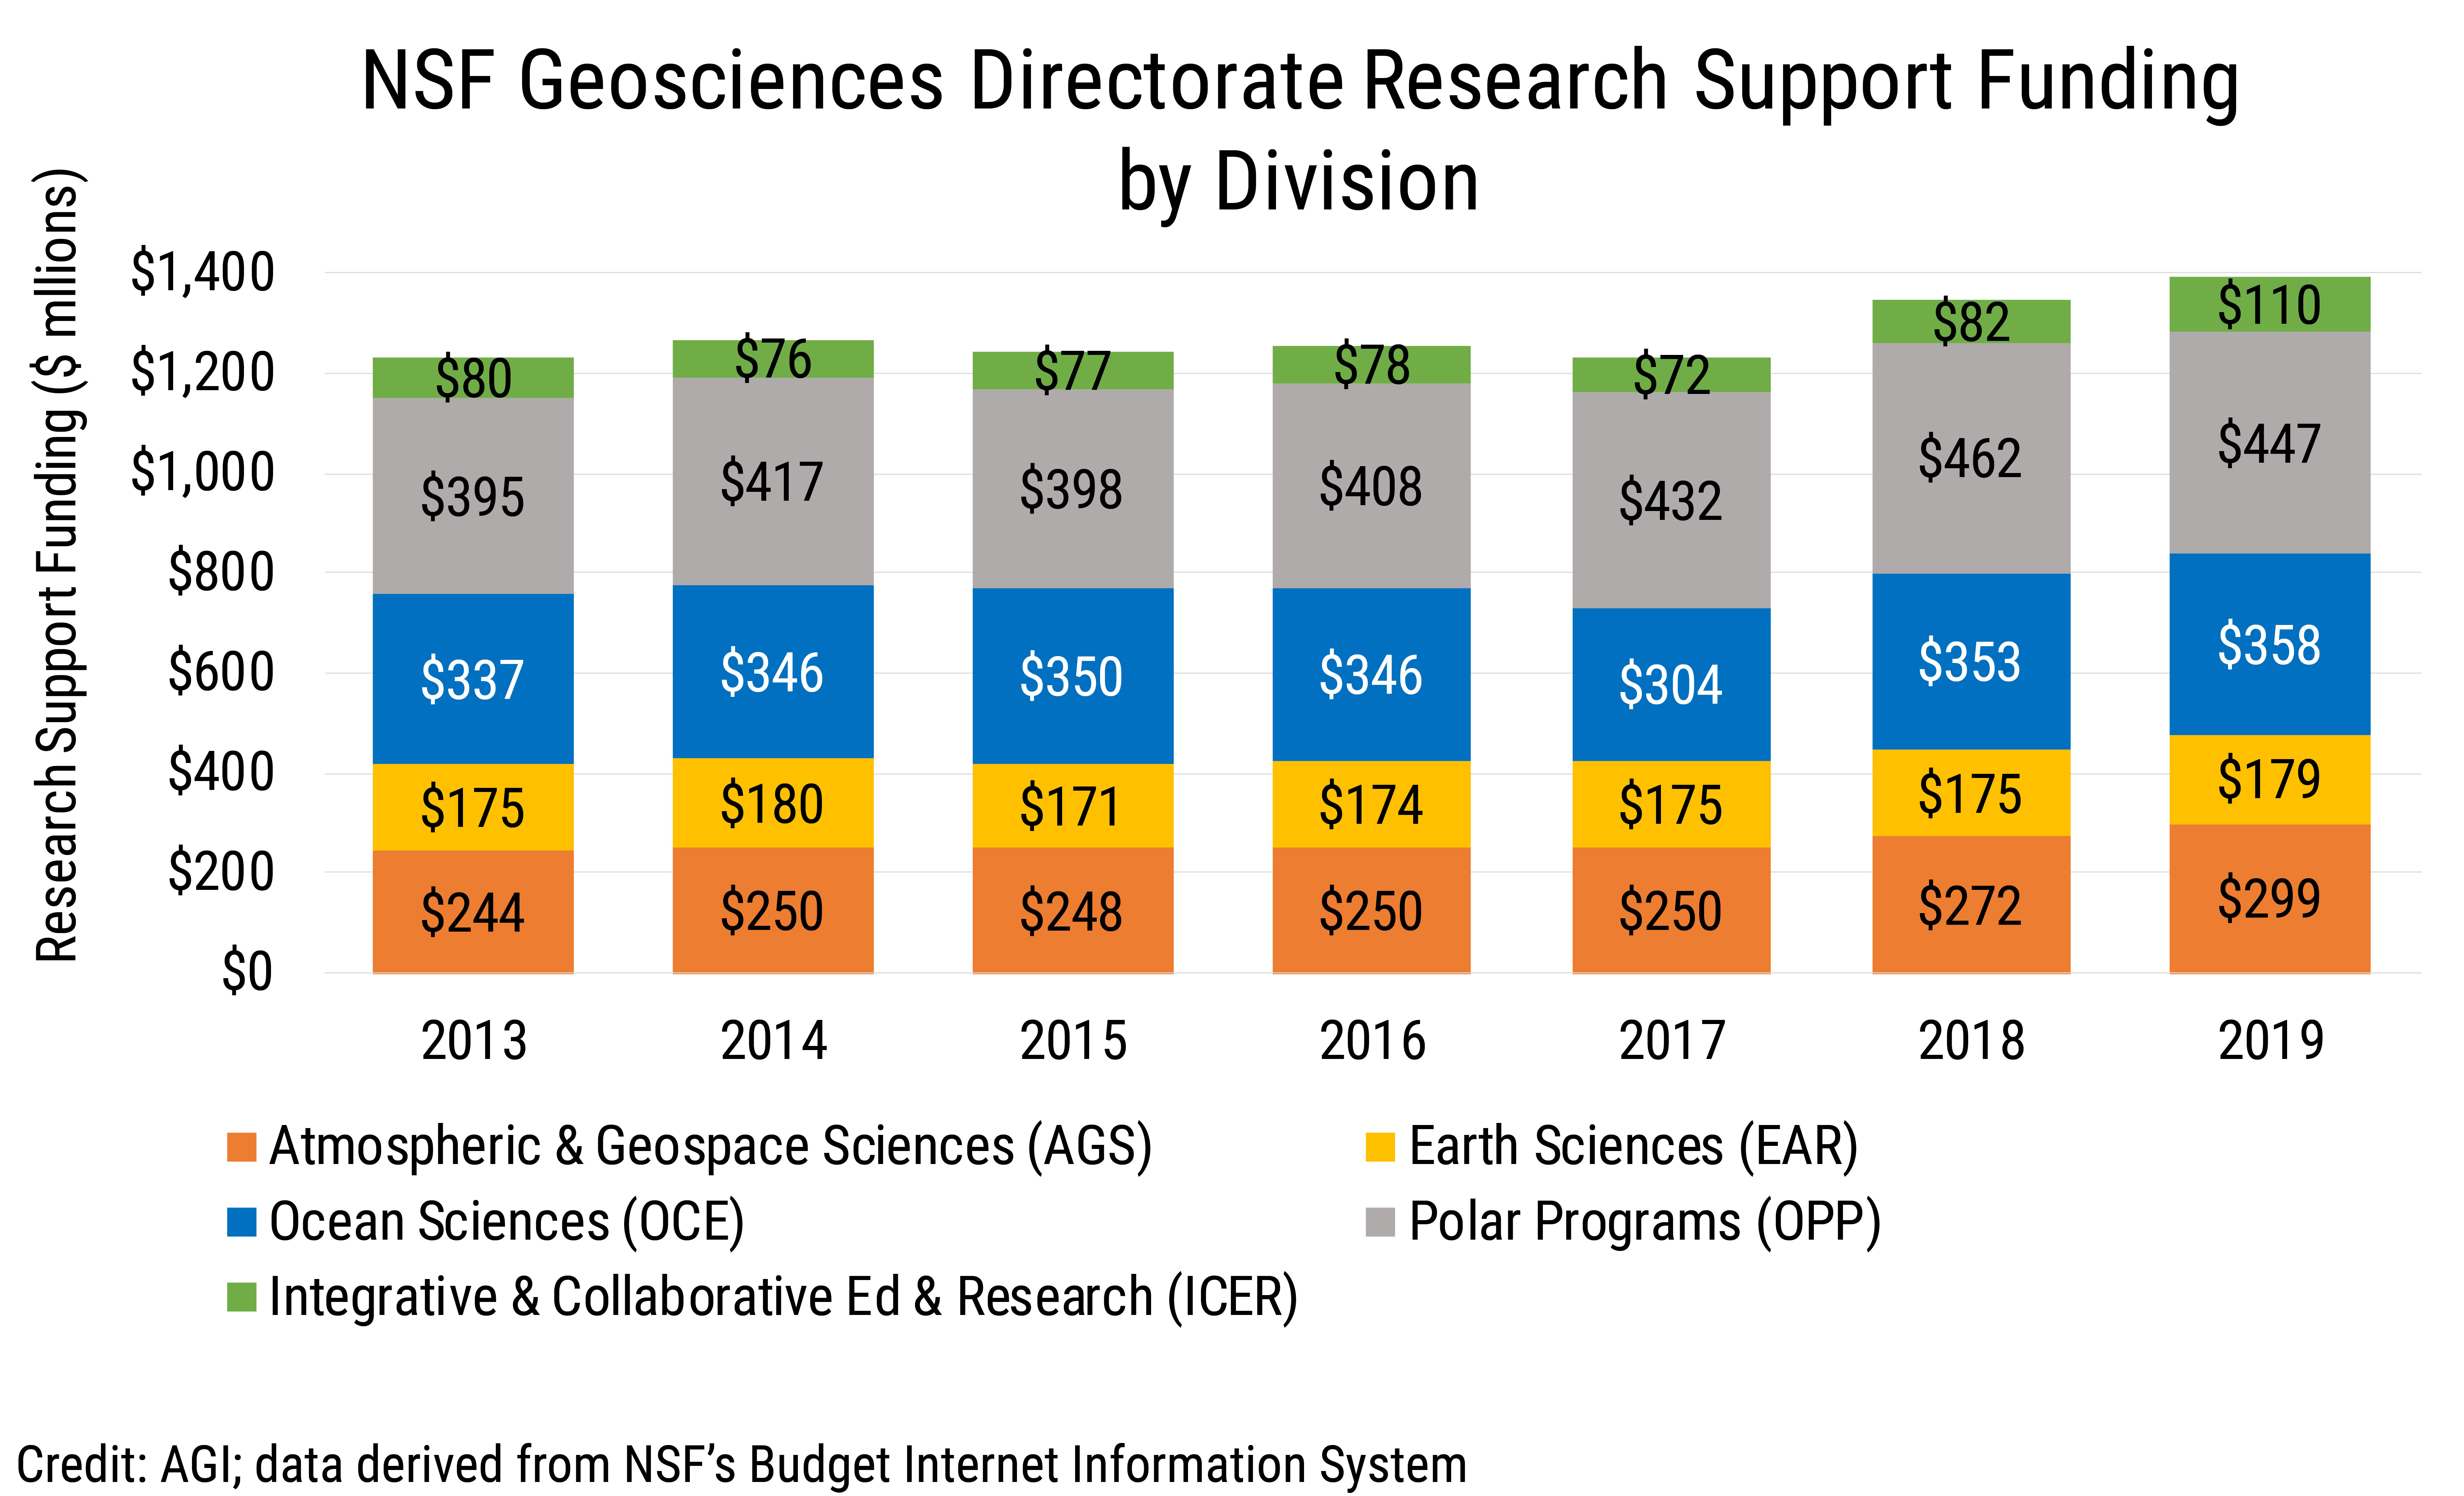 Data Brief 2020-001 chart 01: NSF Geosciences Directorate Research Support Funding by Division (credit: AGI; data derived from NSF BIIS)